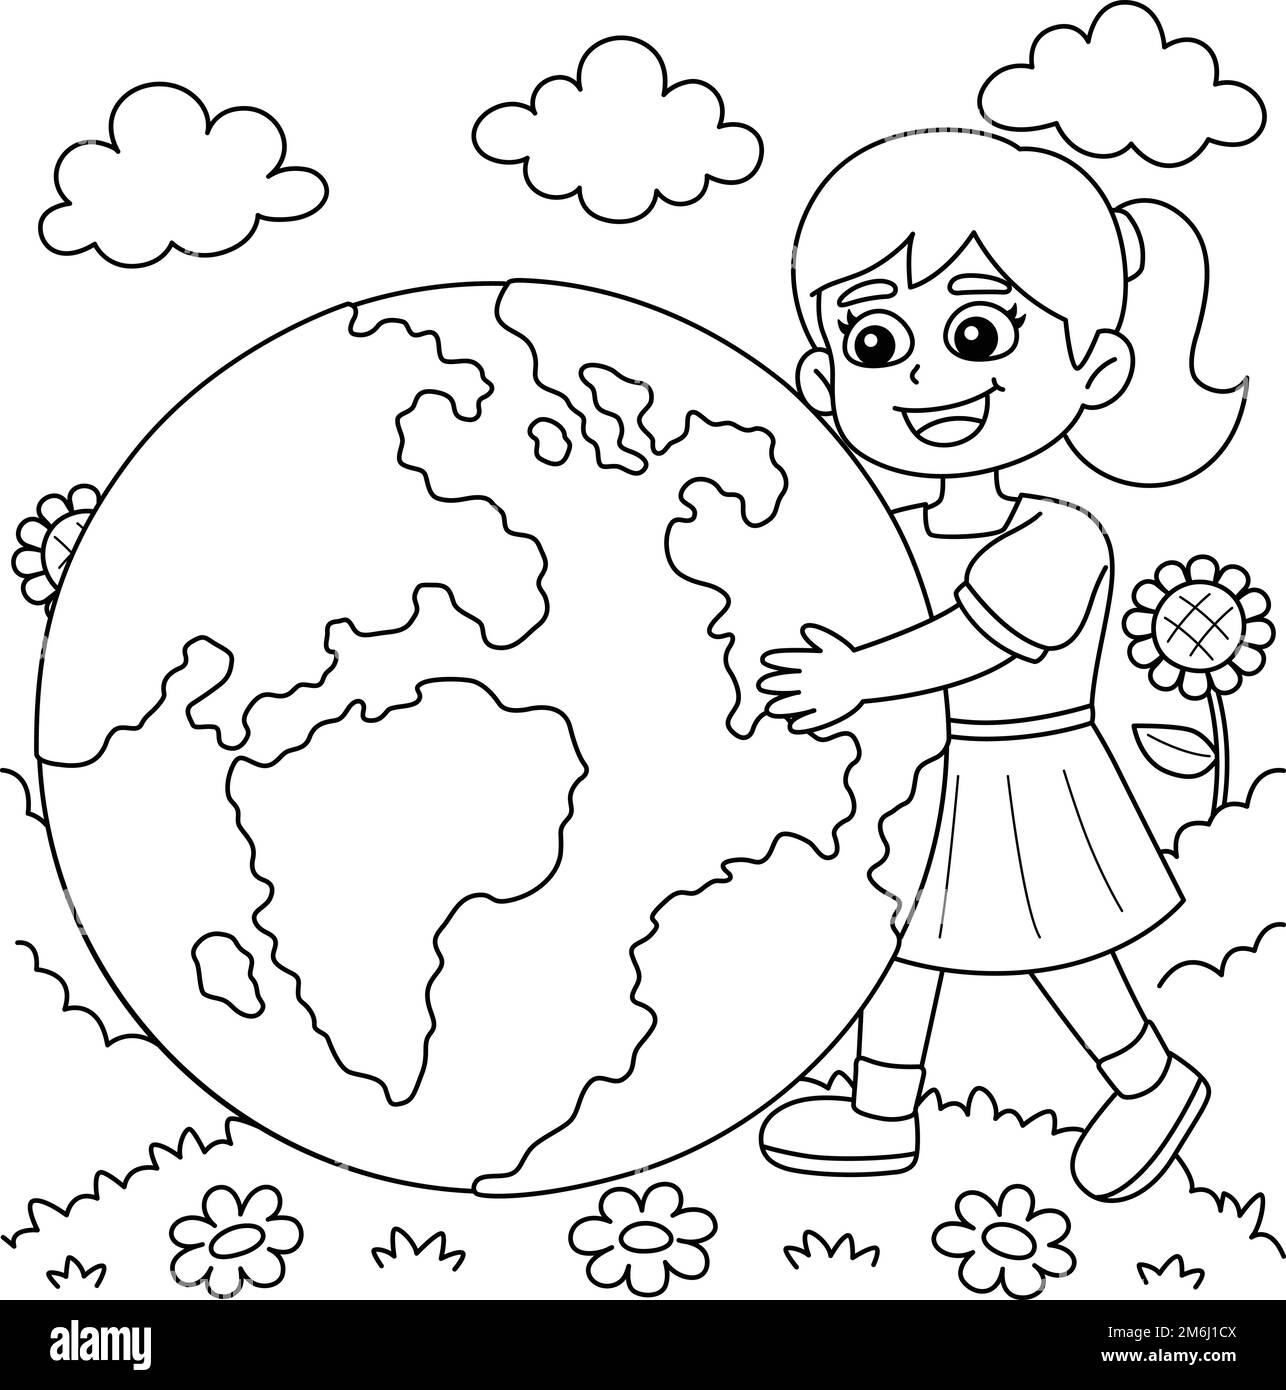 Girl Holding Earth Coloring Page for Kids Stock Vector